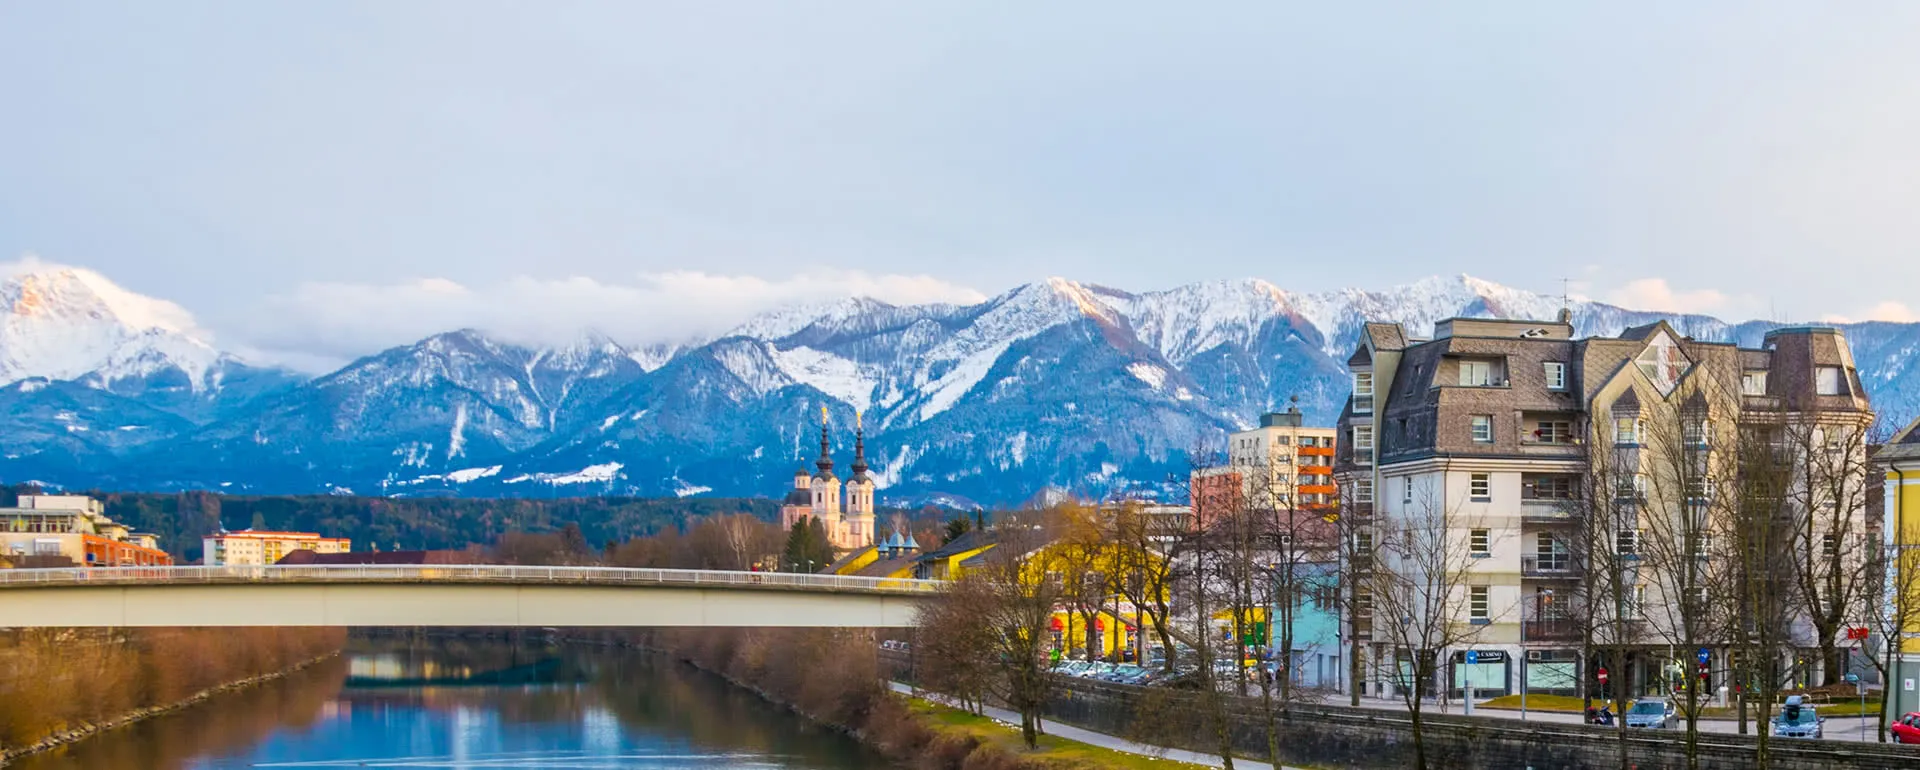 Villach - the destination for group trips